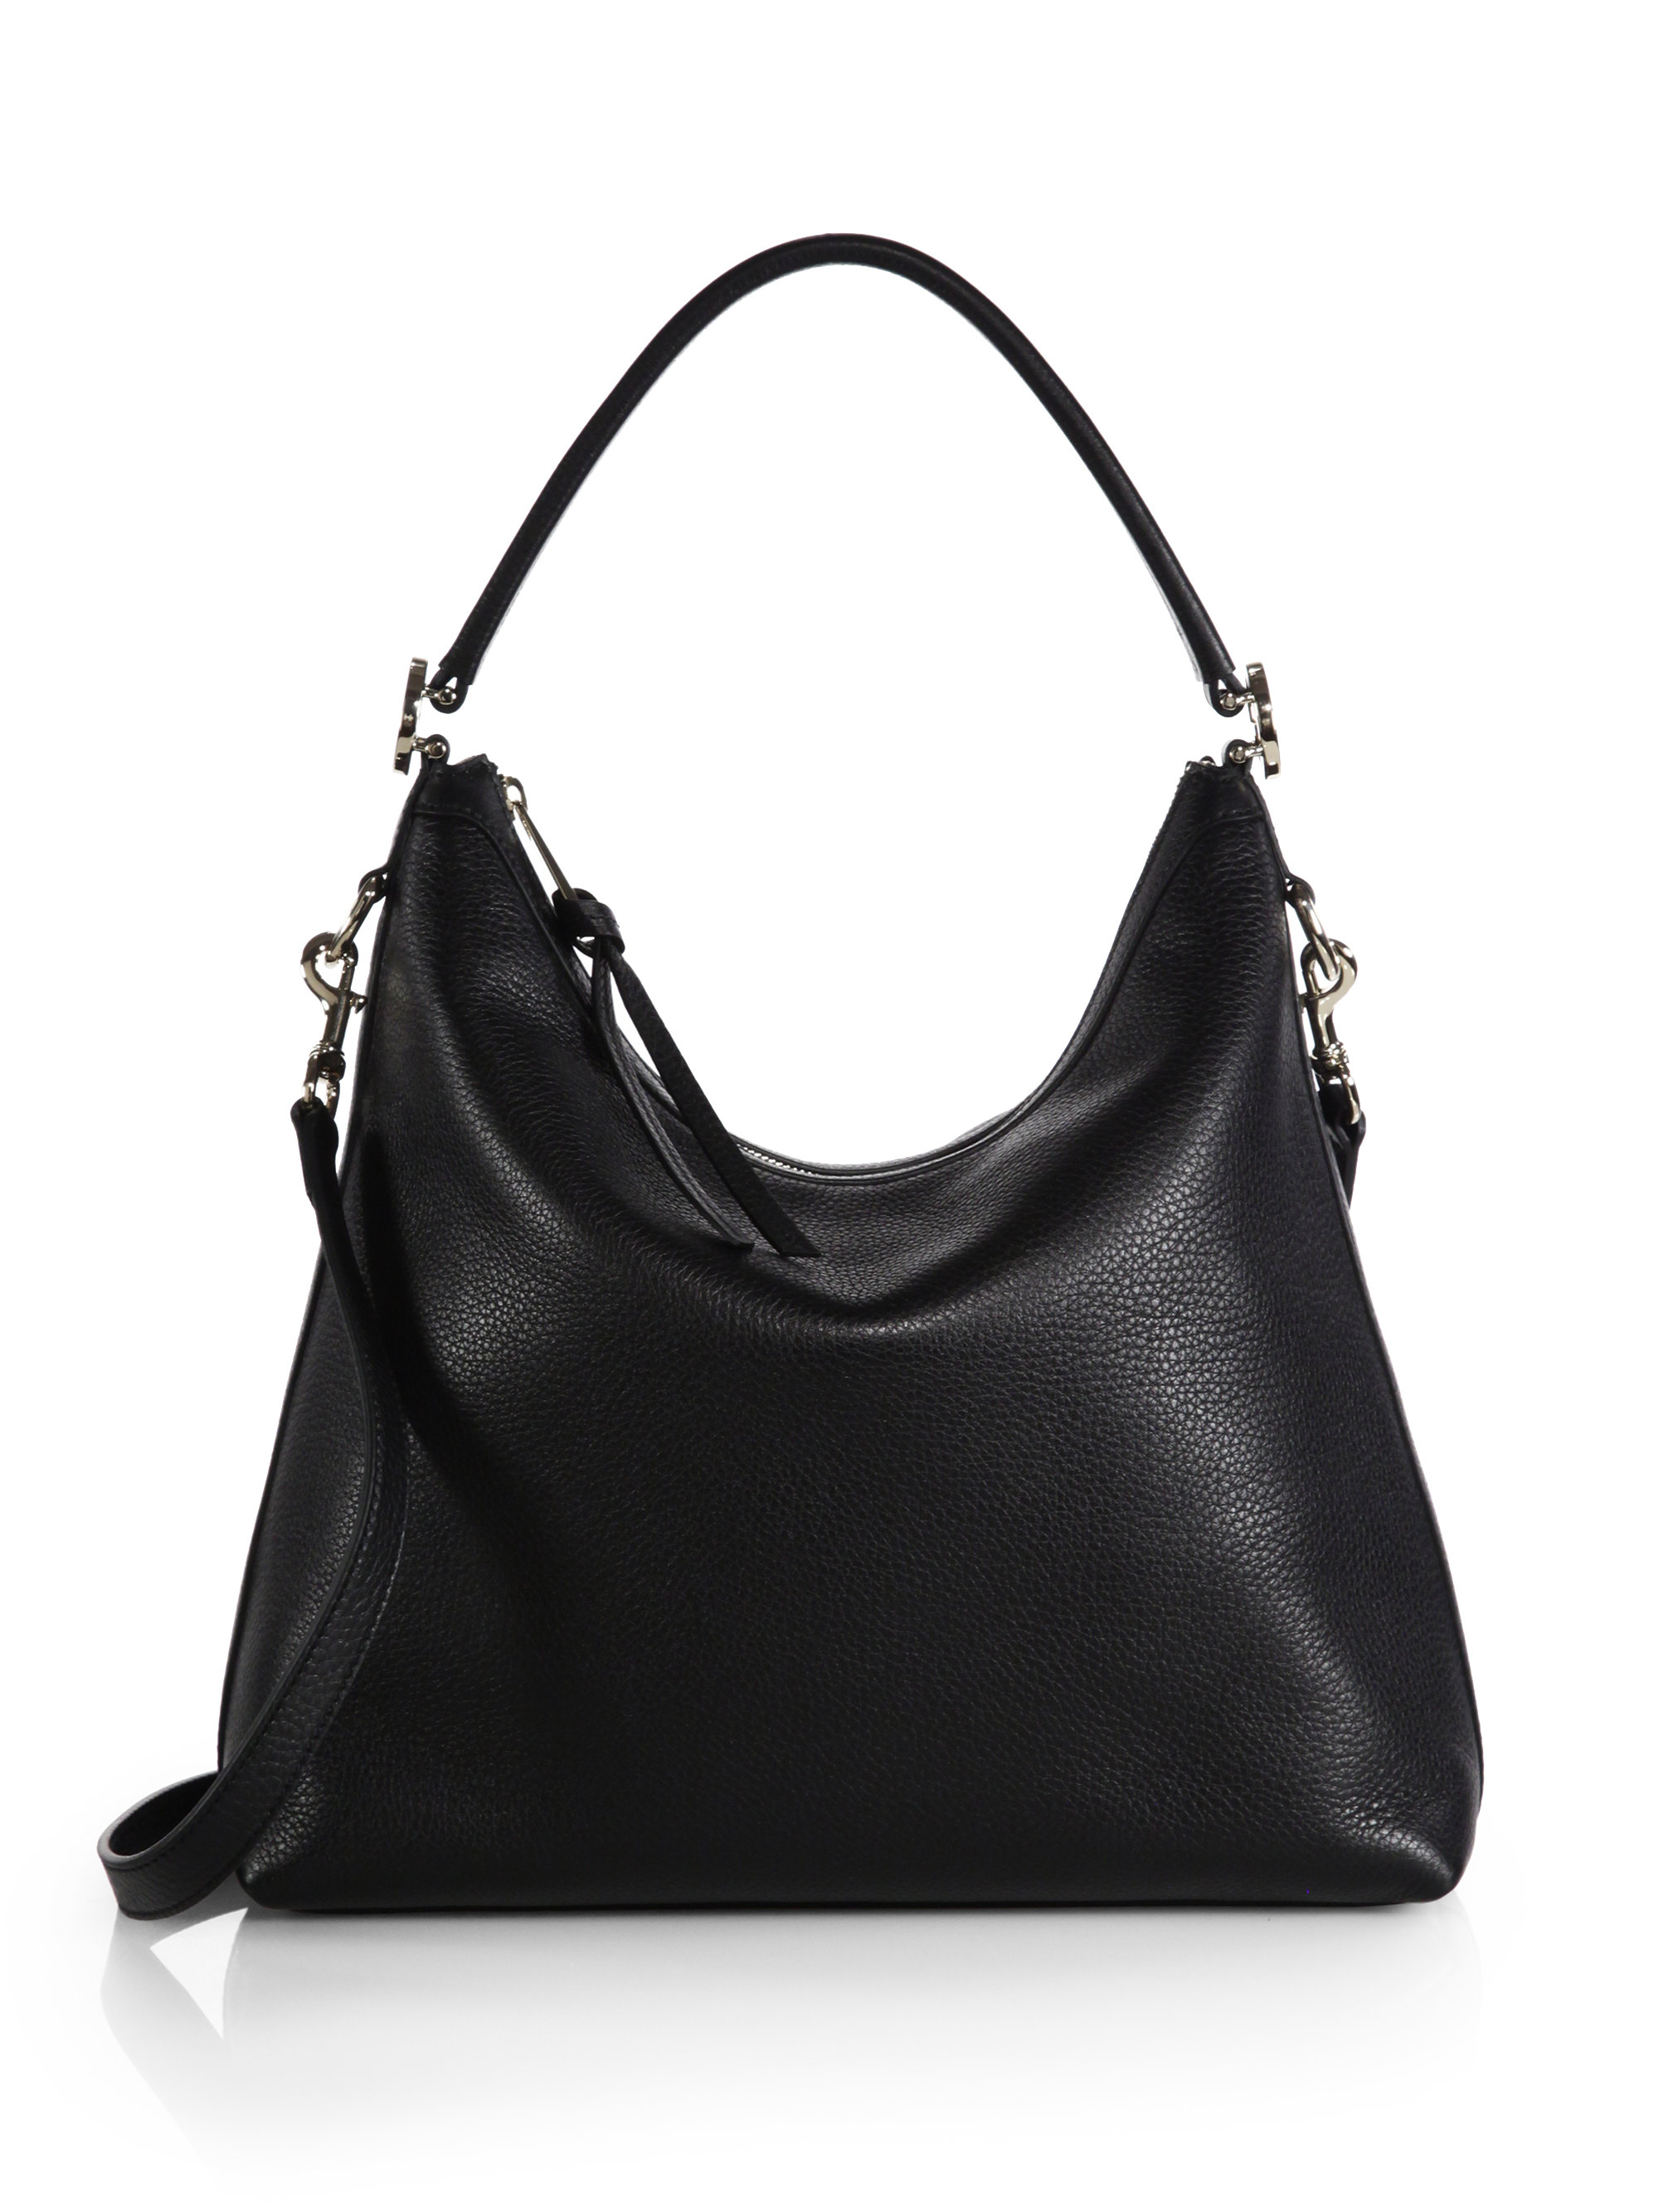 Gucci Miss Gg Leather Hobo Bag in Black | Lyst